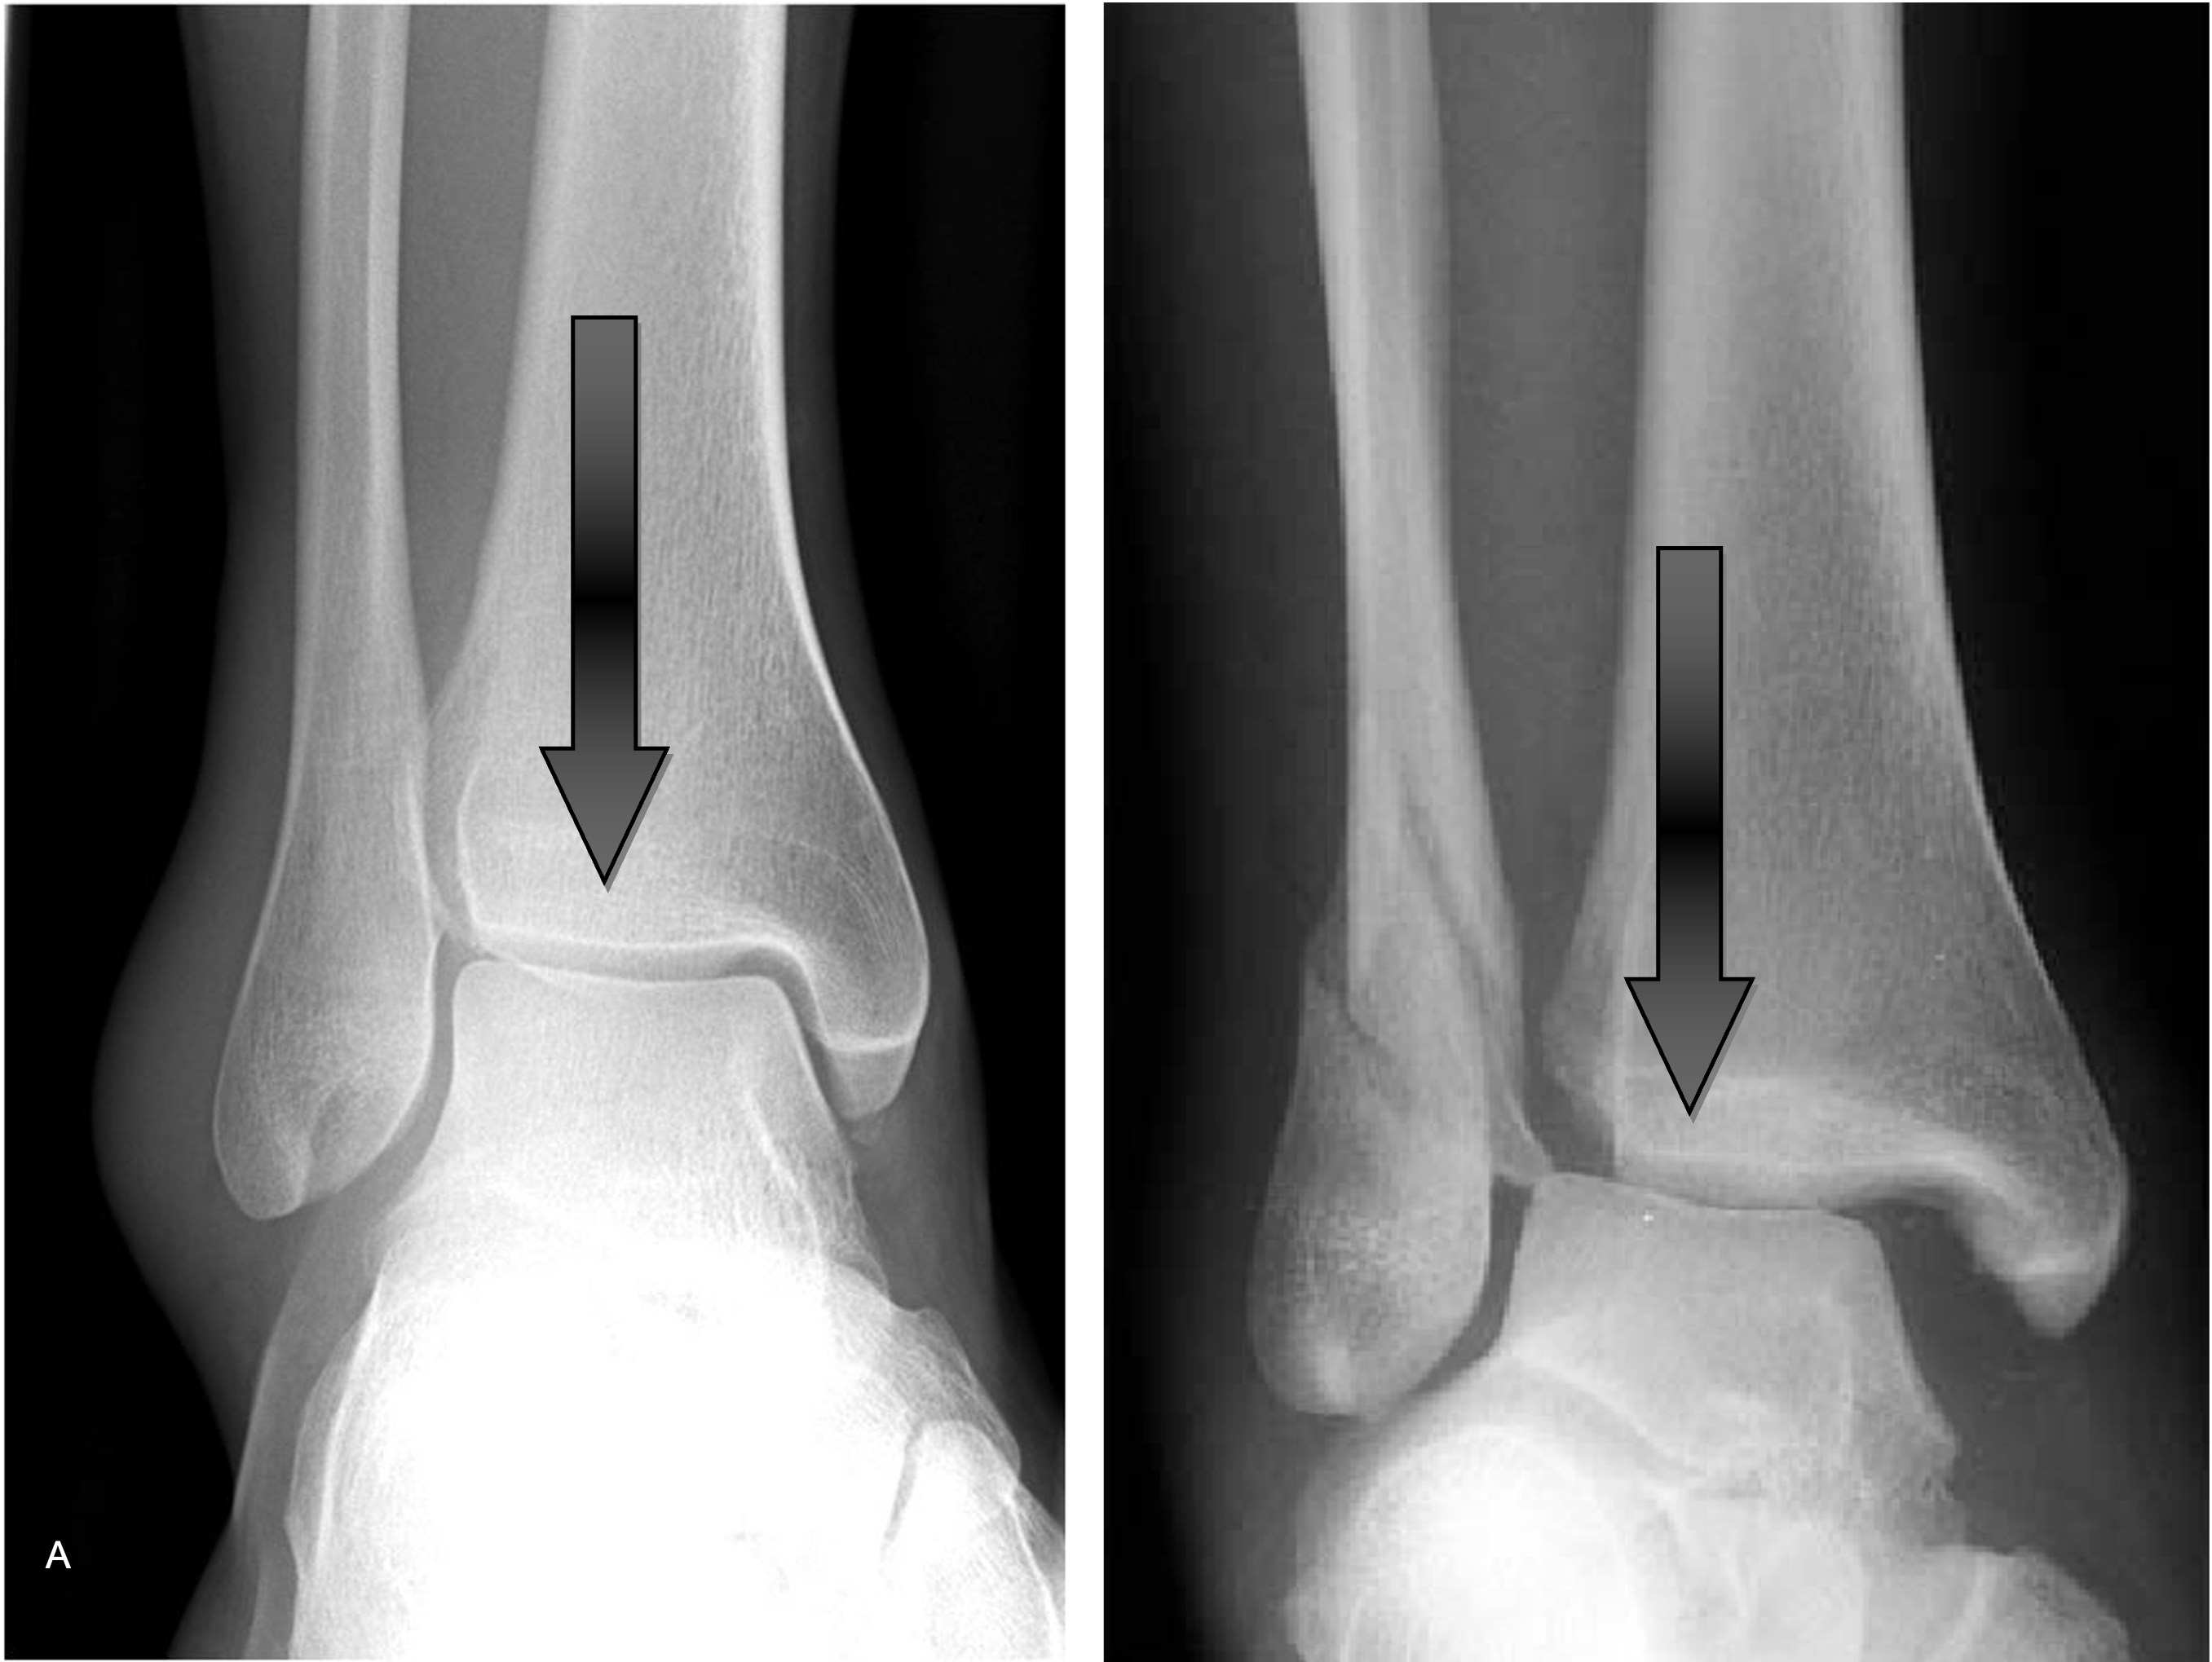 Radiographic analysis of adult ankle fractures using combined